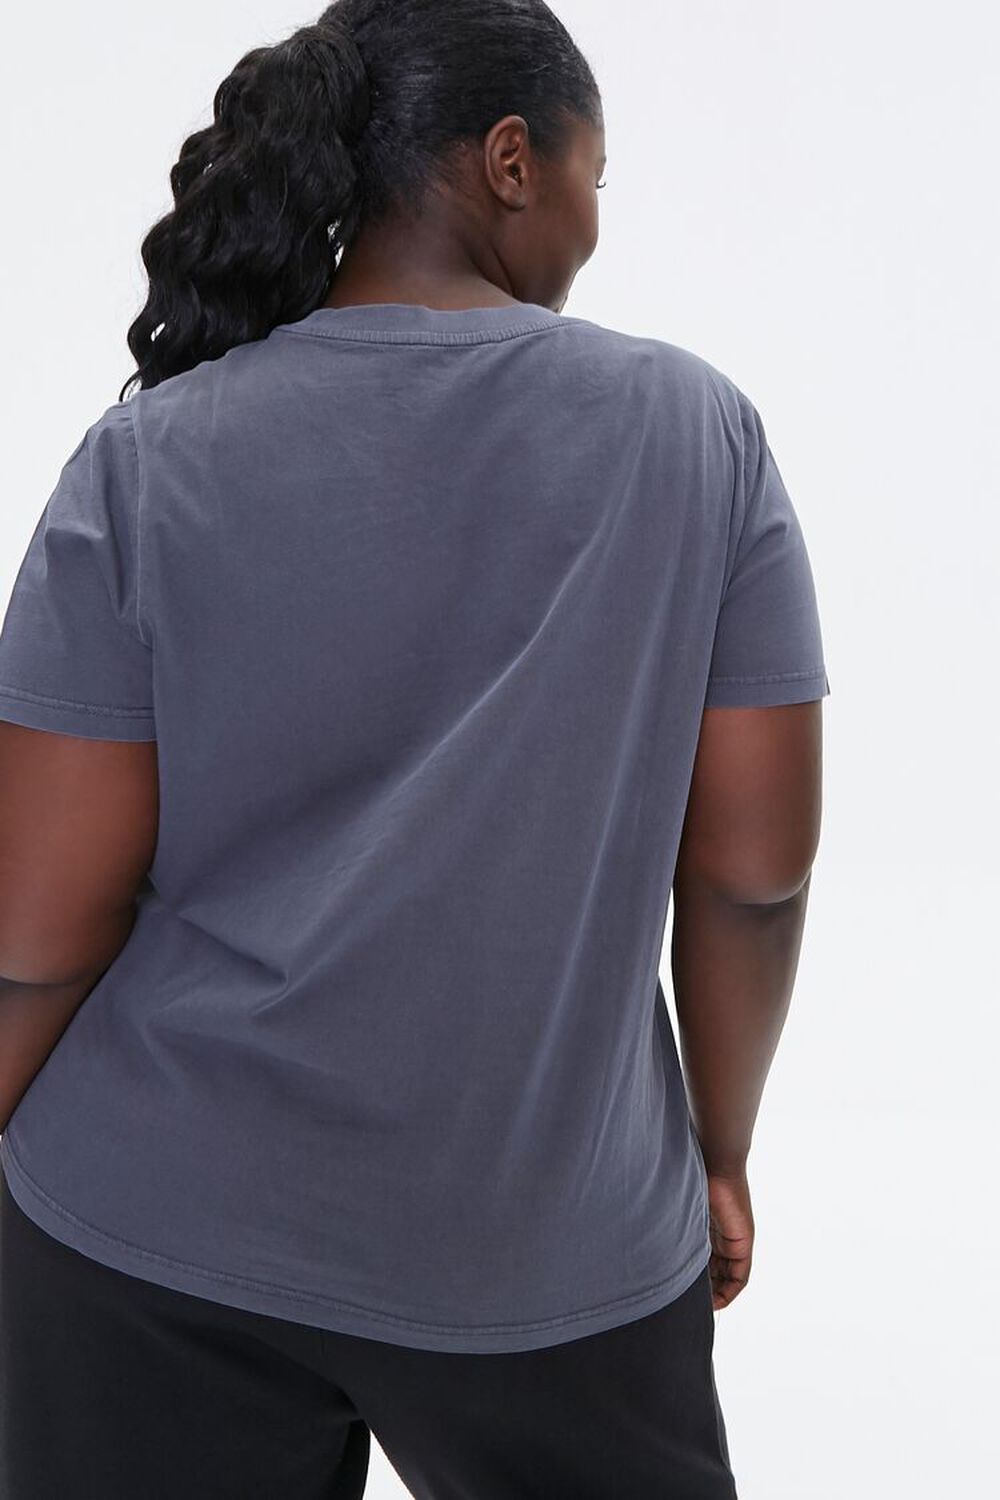 CHARCOAL/WHITE Plus Size Aries Graphic Tee, image 3